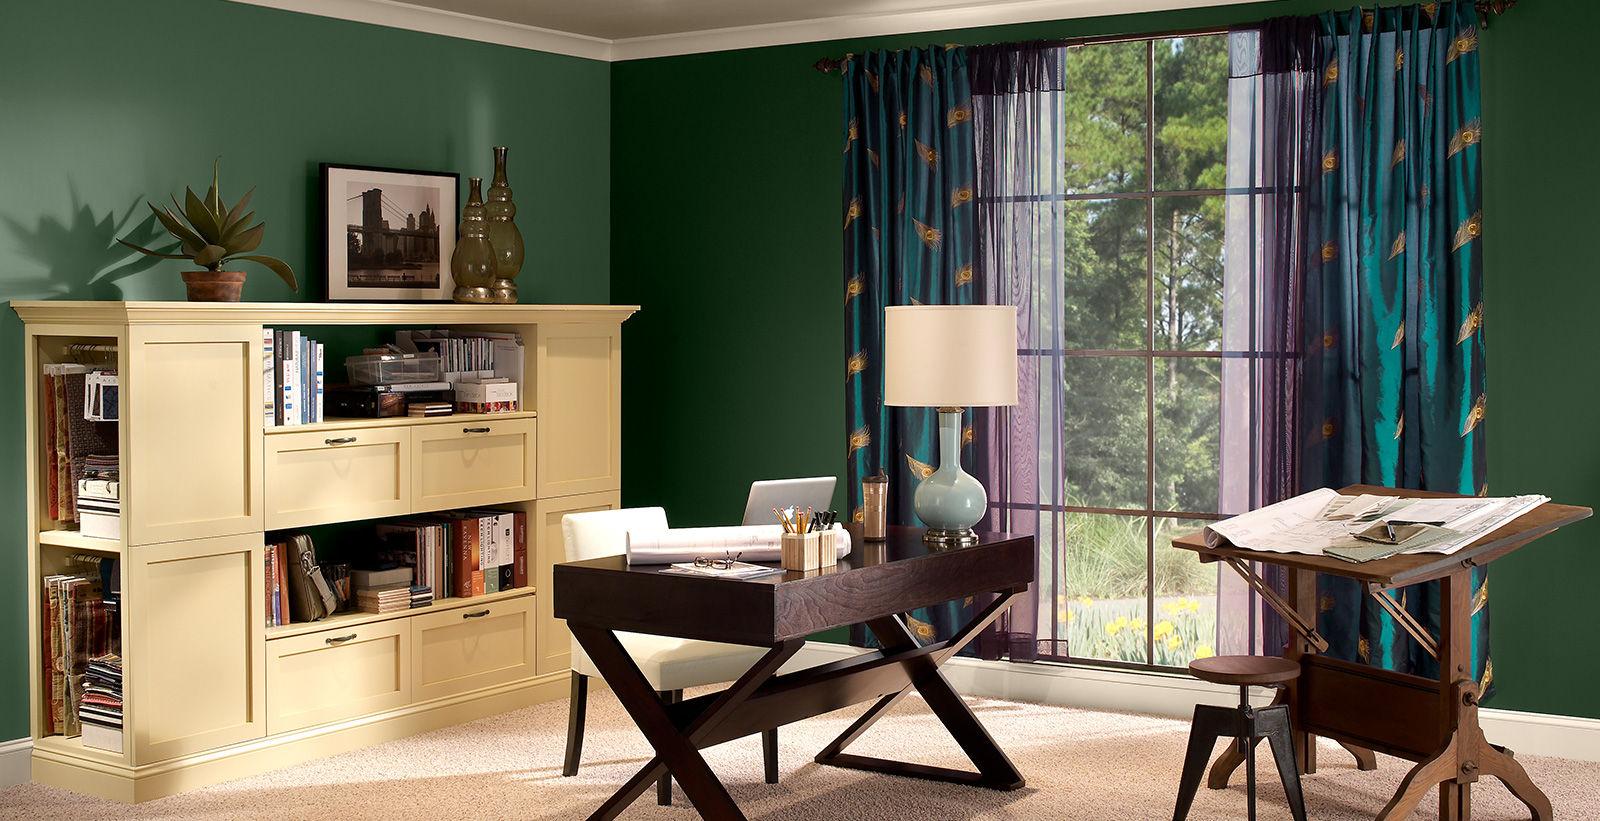 Office workspace with green walls, white trim, and wood furniture, bold and dramatic style.